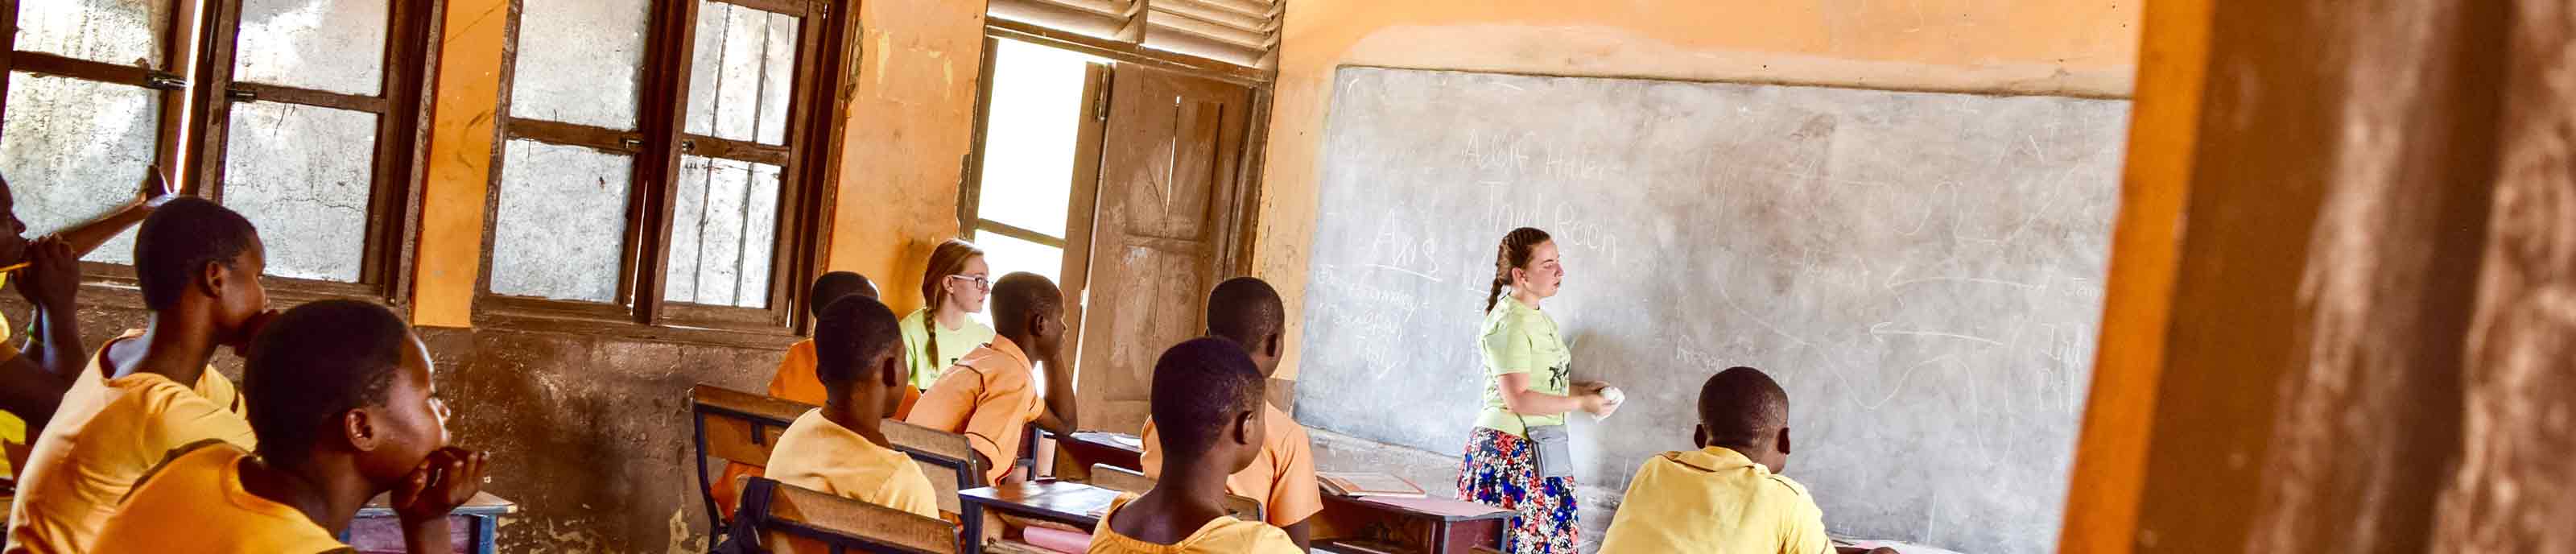 A Benedictine College student teaches at a school in Ghana